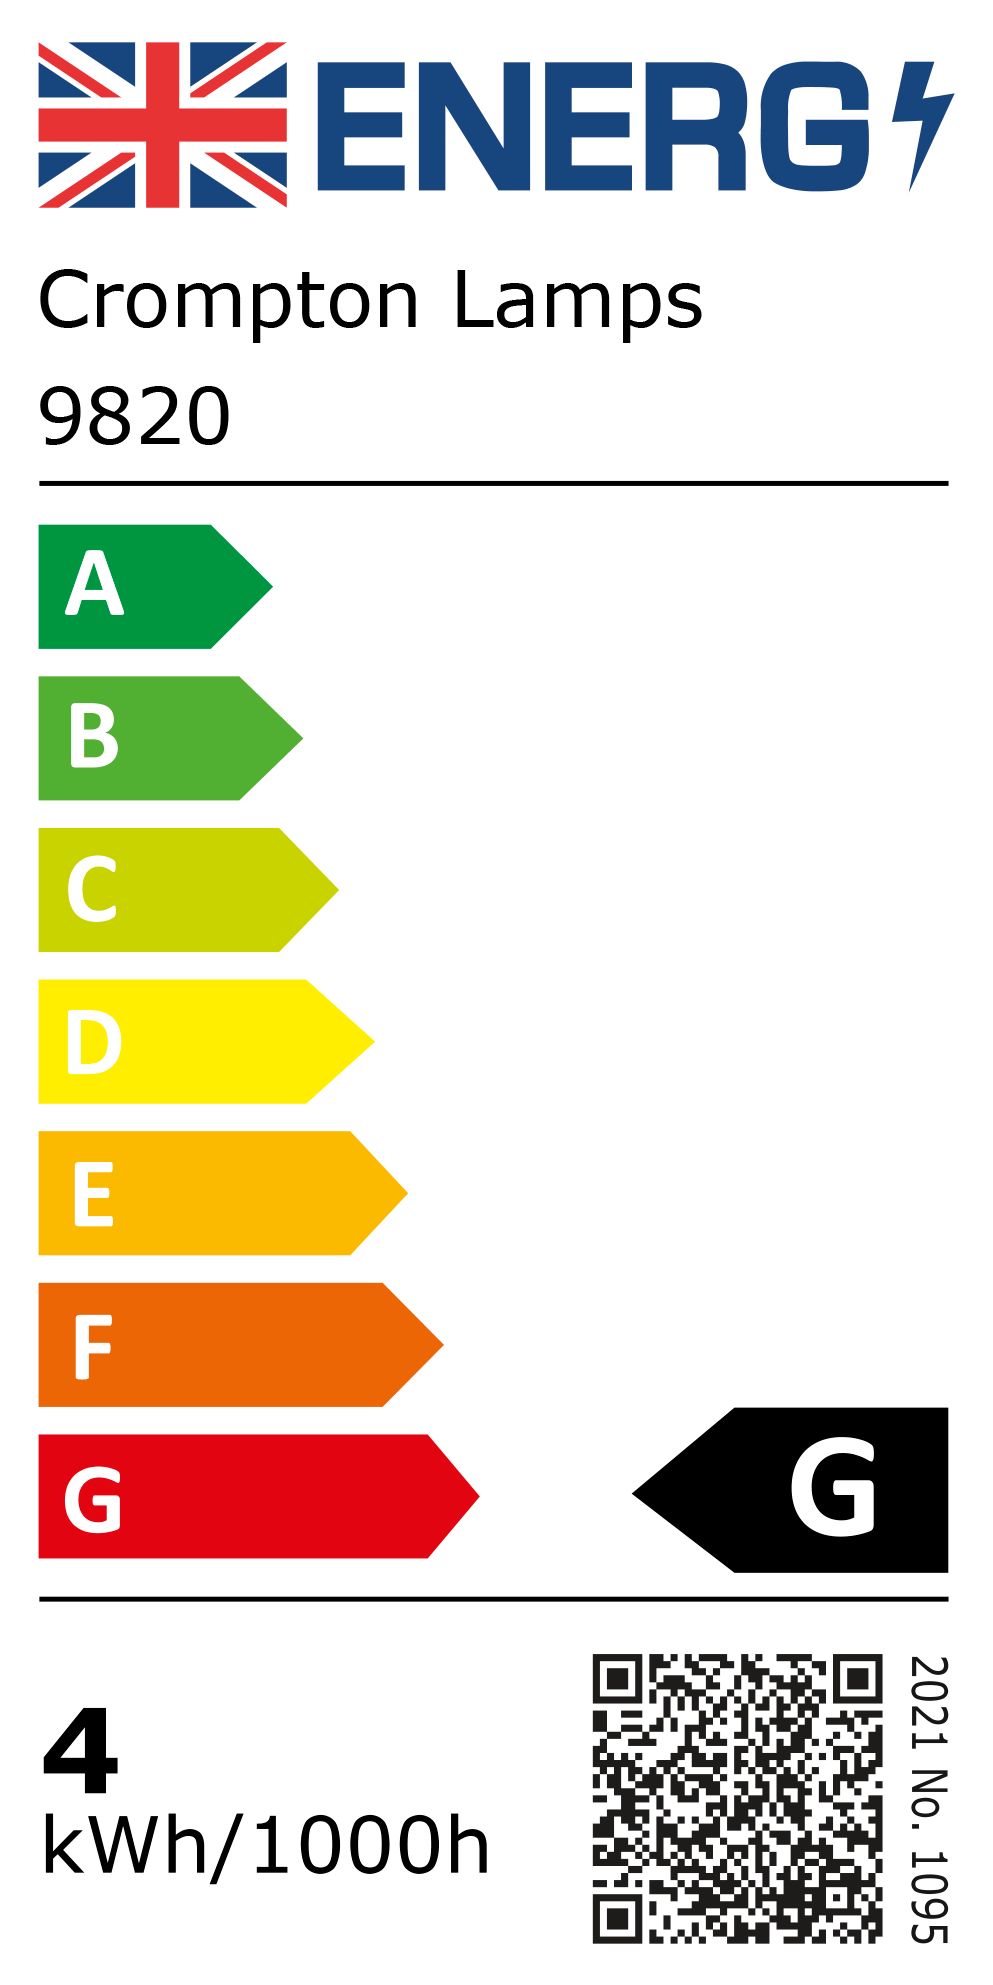 New 2021 Energy Rating Label: Stock Code 9820